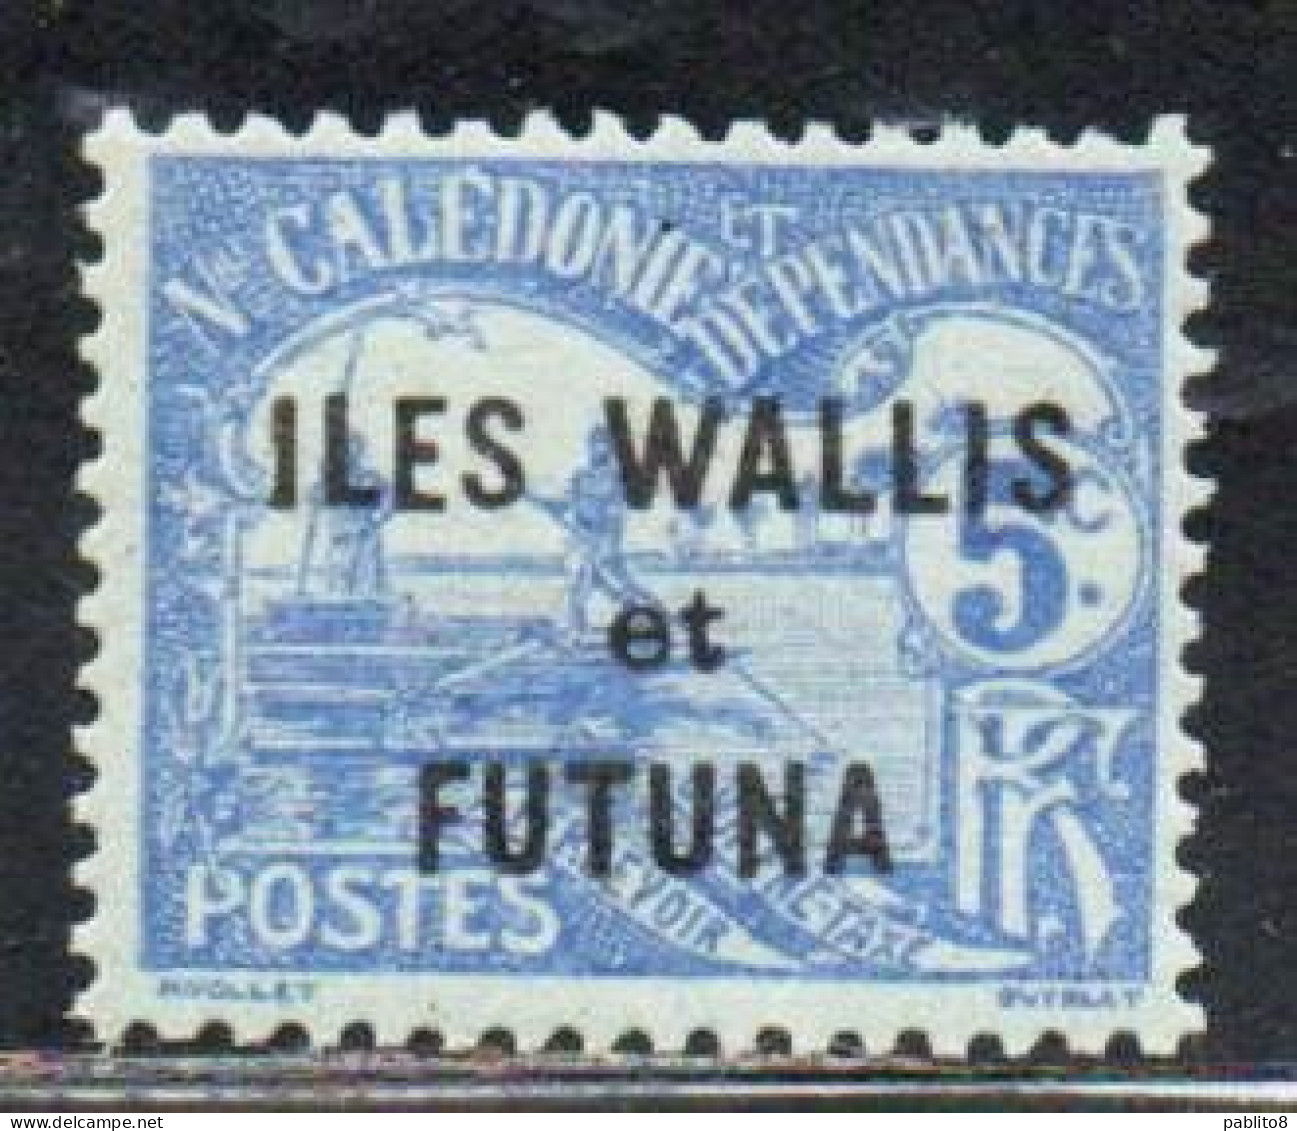 WALLIS AND FUTUNA ISLANDS 1920 POSTAGE DUE STAMPS TAXE SEGNATASSE MEN POLING BOAT NEW CALEDONIA OVERPRINTED 5c MH - Postage Due